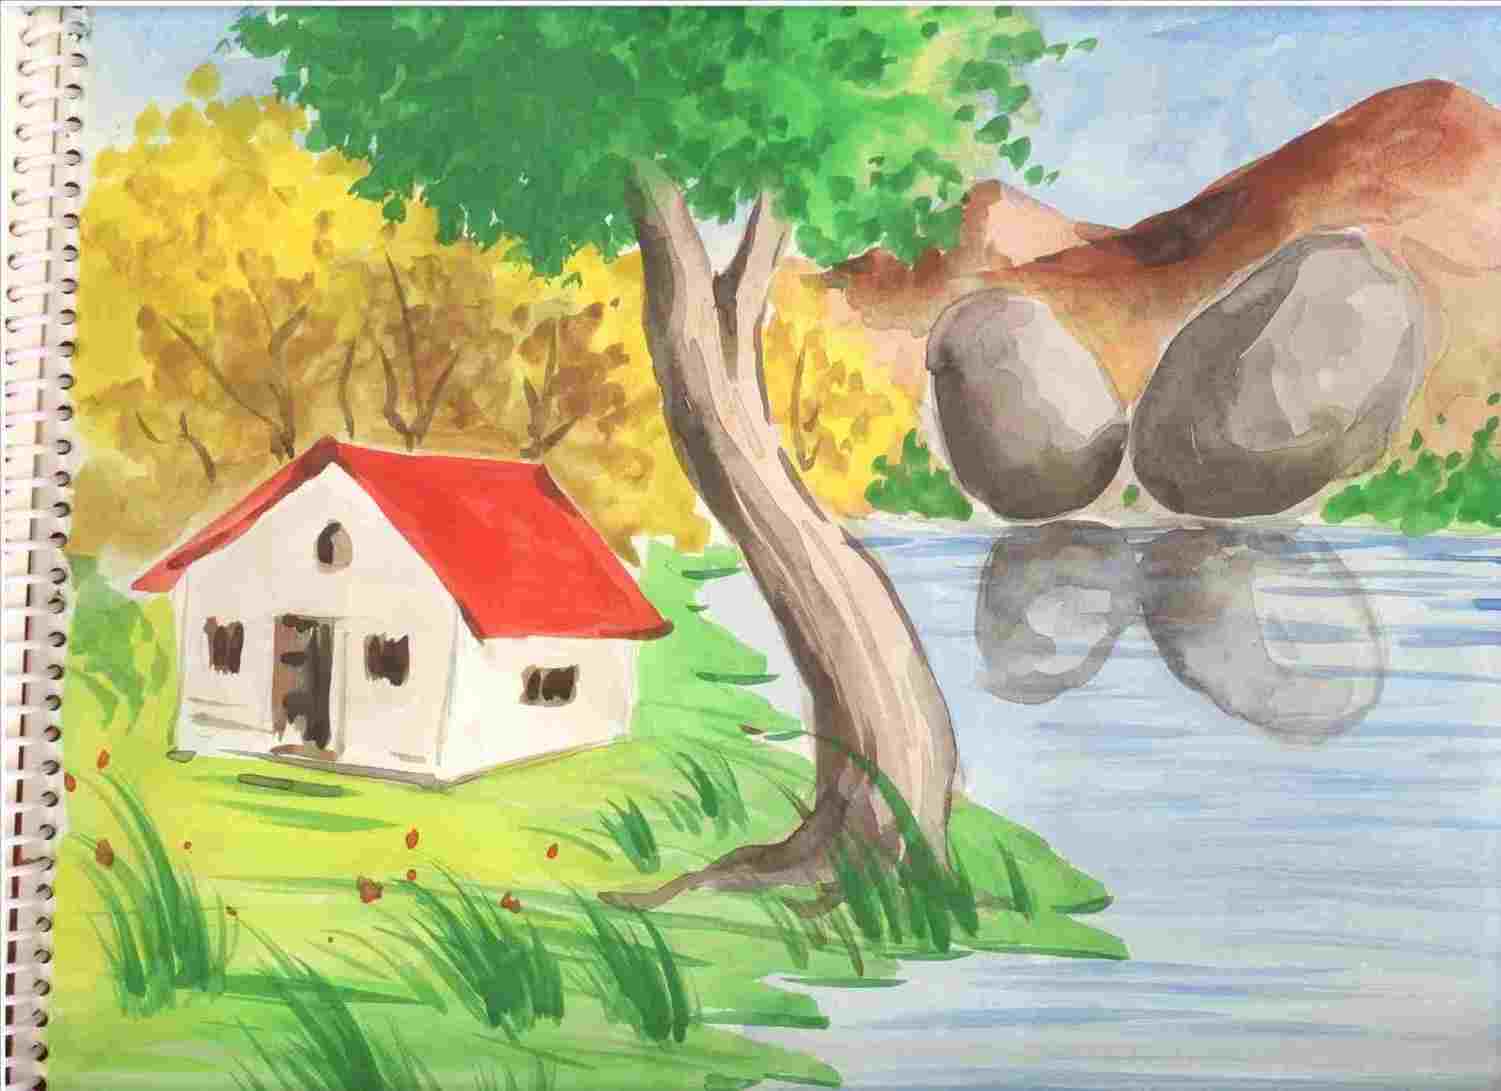 How to Draw Nature Scenery of Fisherman Village | Easy Scenery Drawing of  Mountain Beach and Houses - YouTube